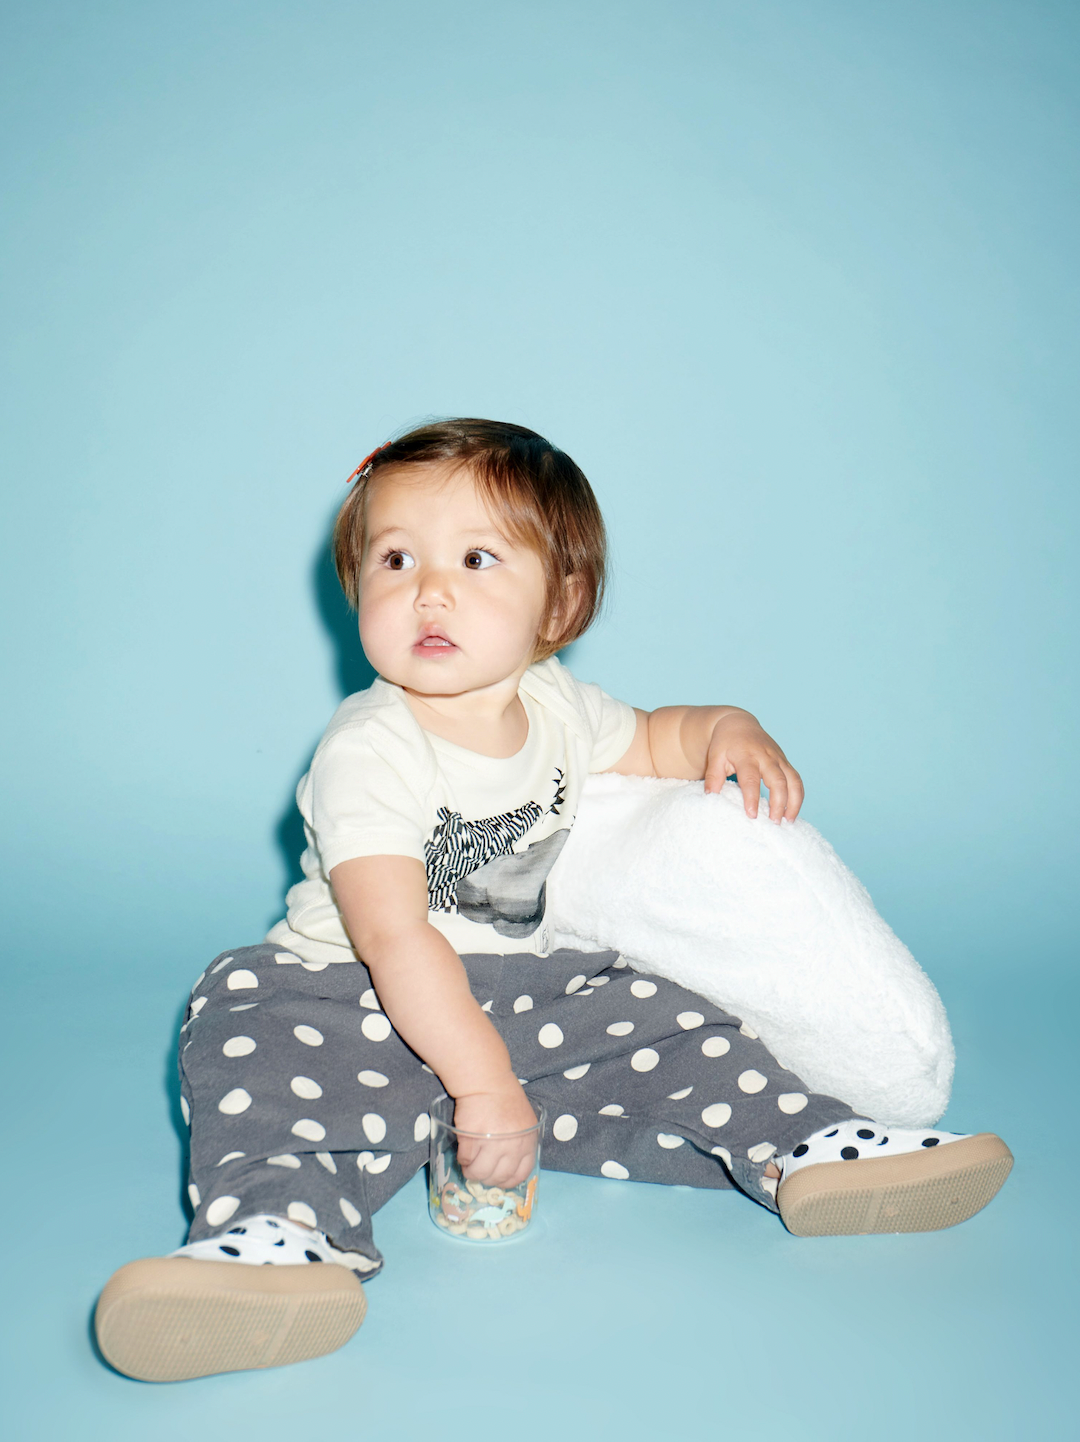 A toddler wearing a baby tee shirt with zigzag patterns and a PBJ sandwich motif